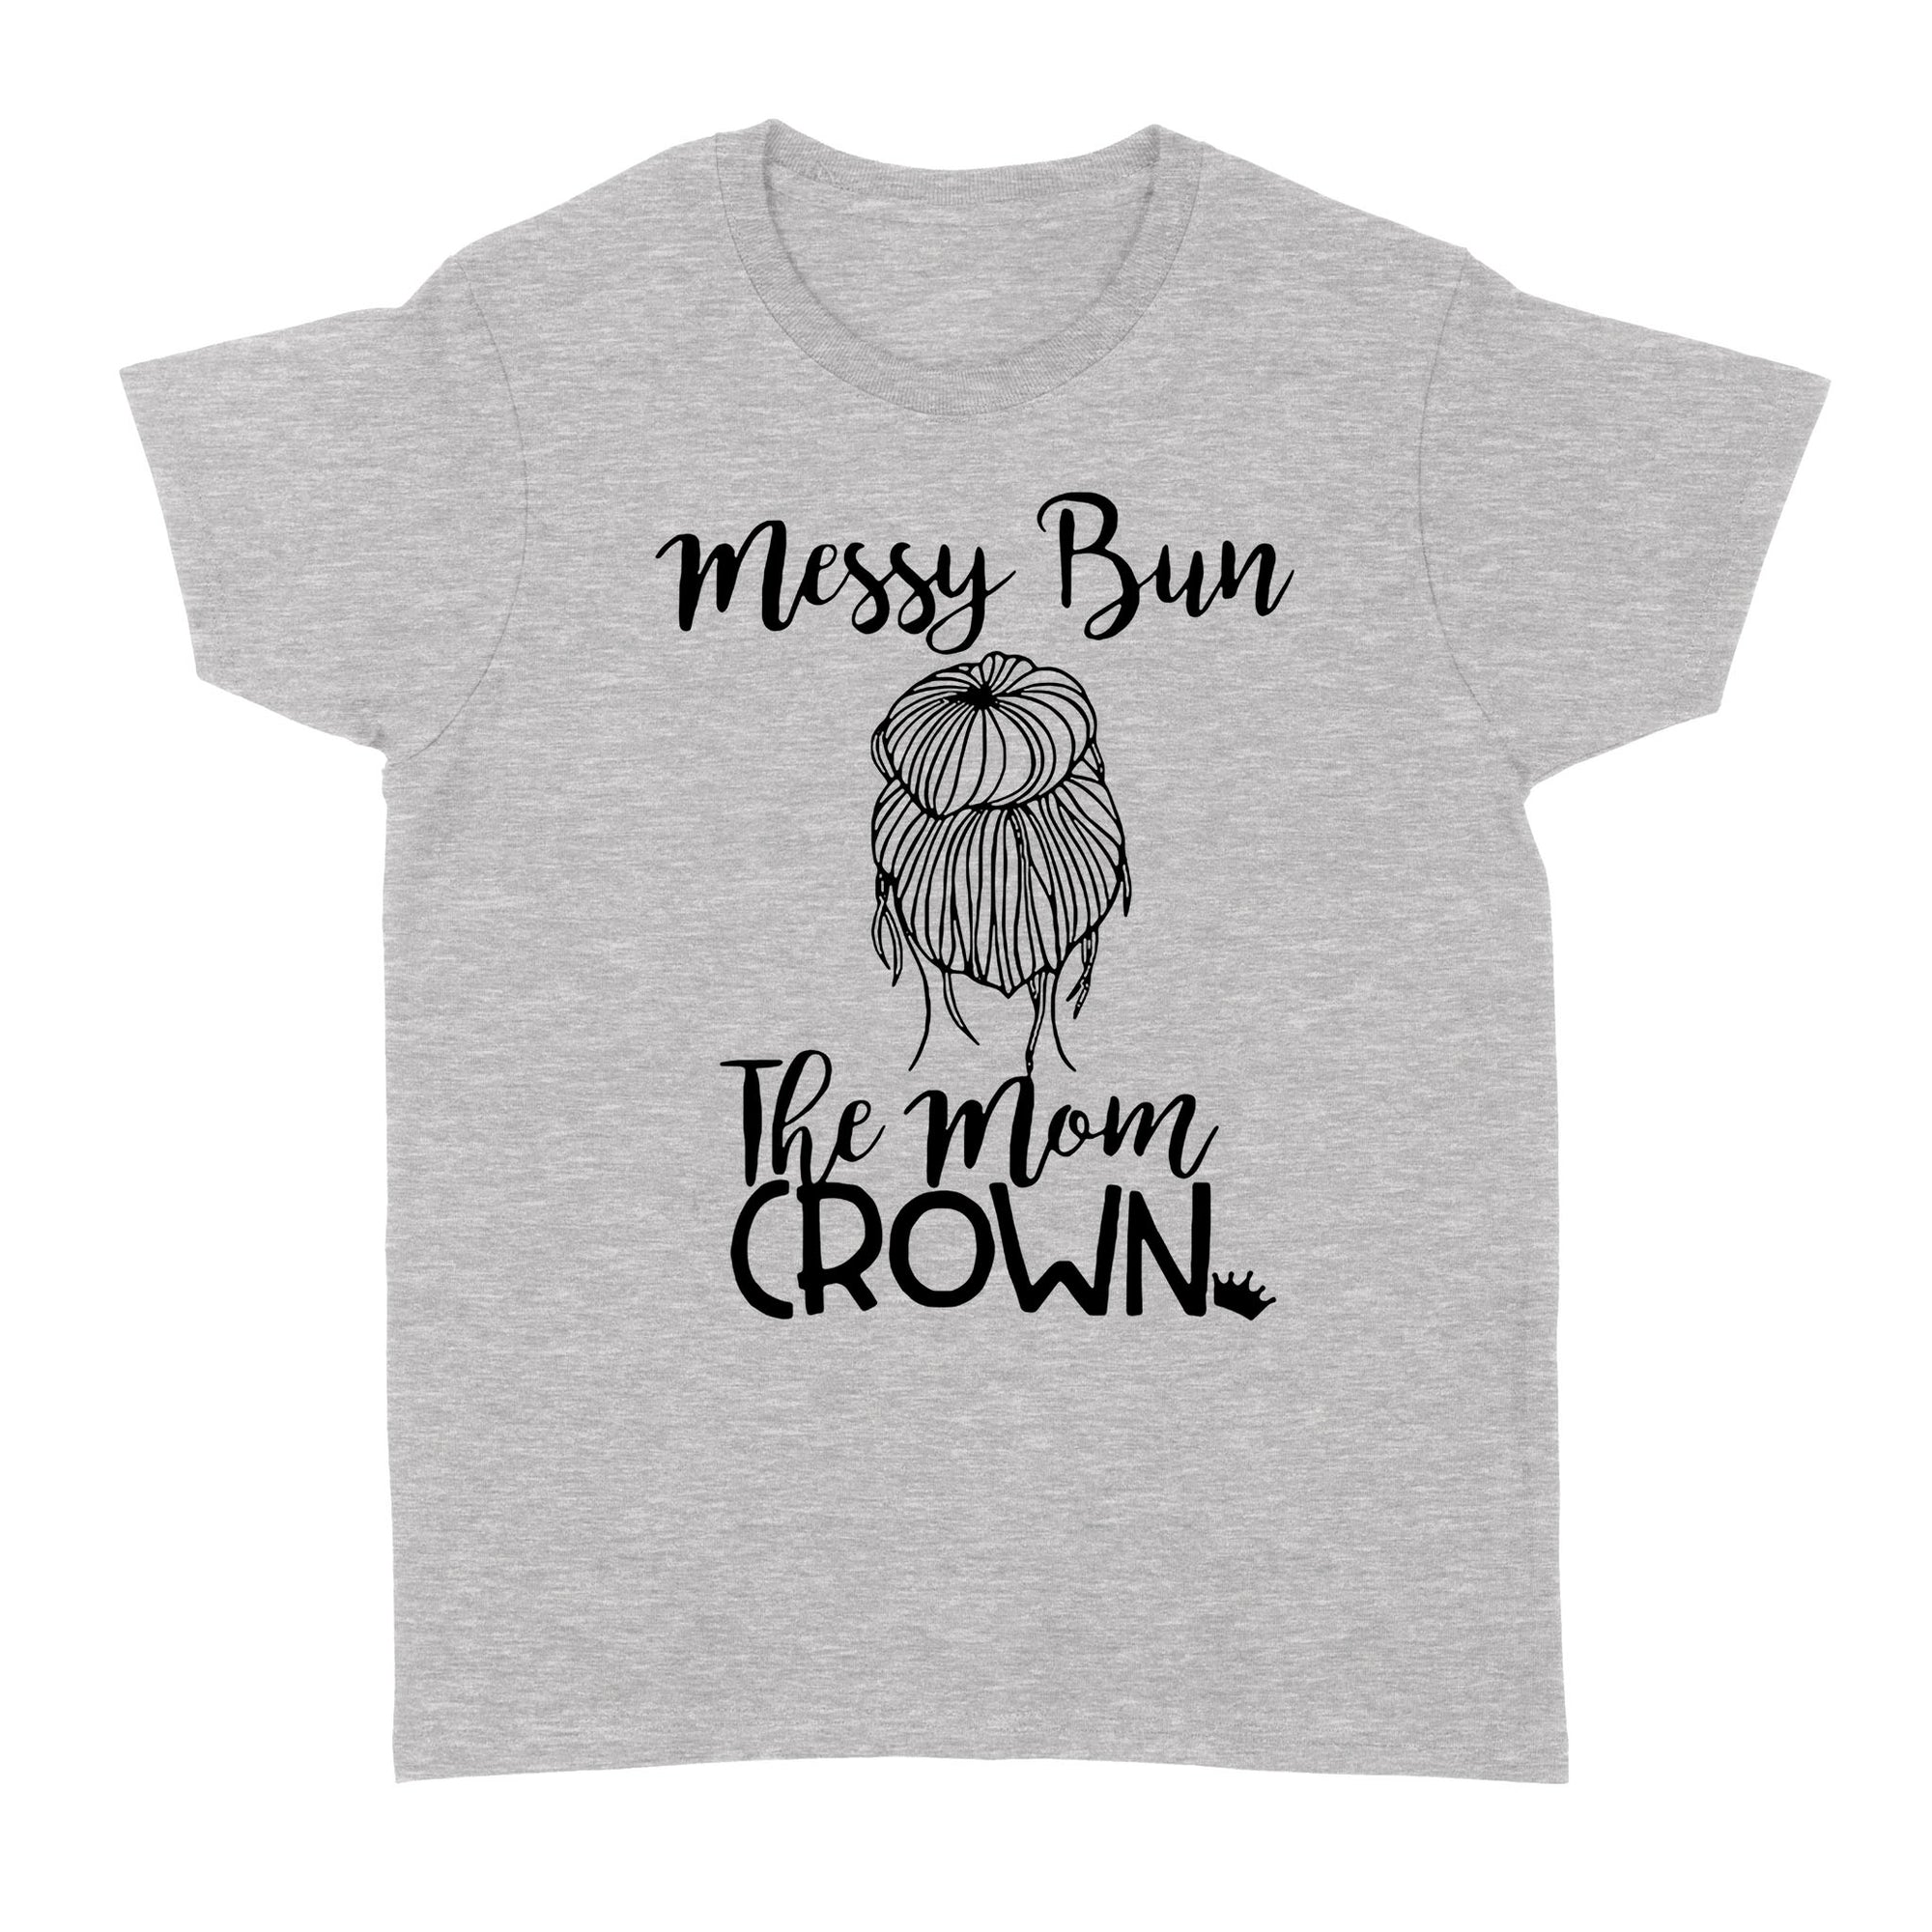 Gift Ideas for Mom Mothers Day Messy Bun The Mom Crown - Standard Women's T-shirt